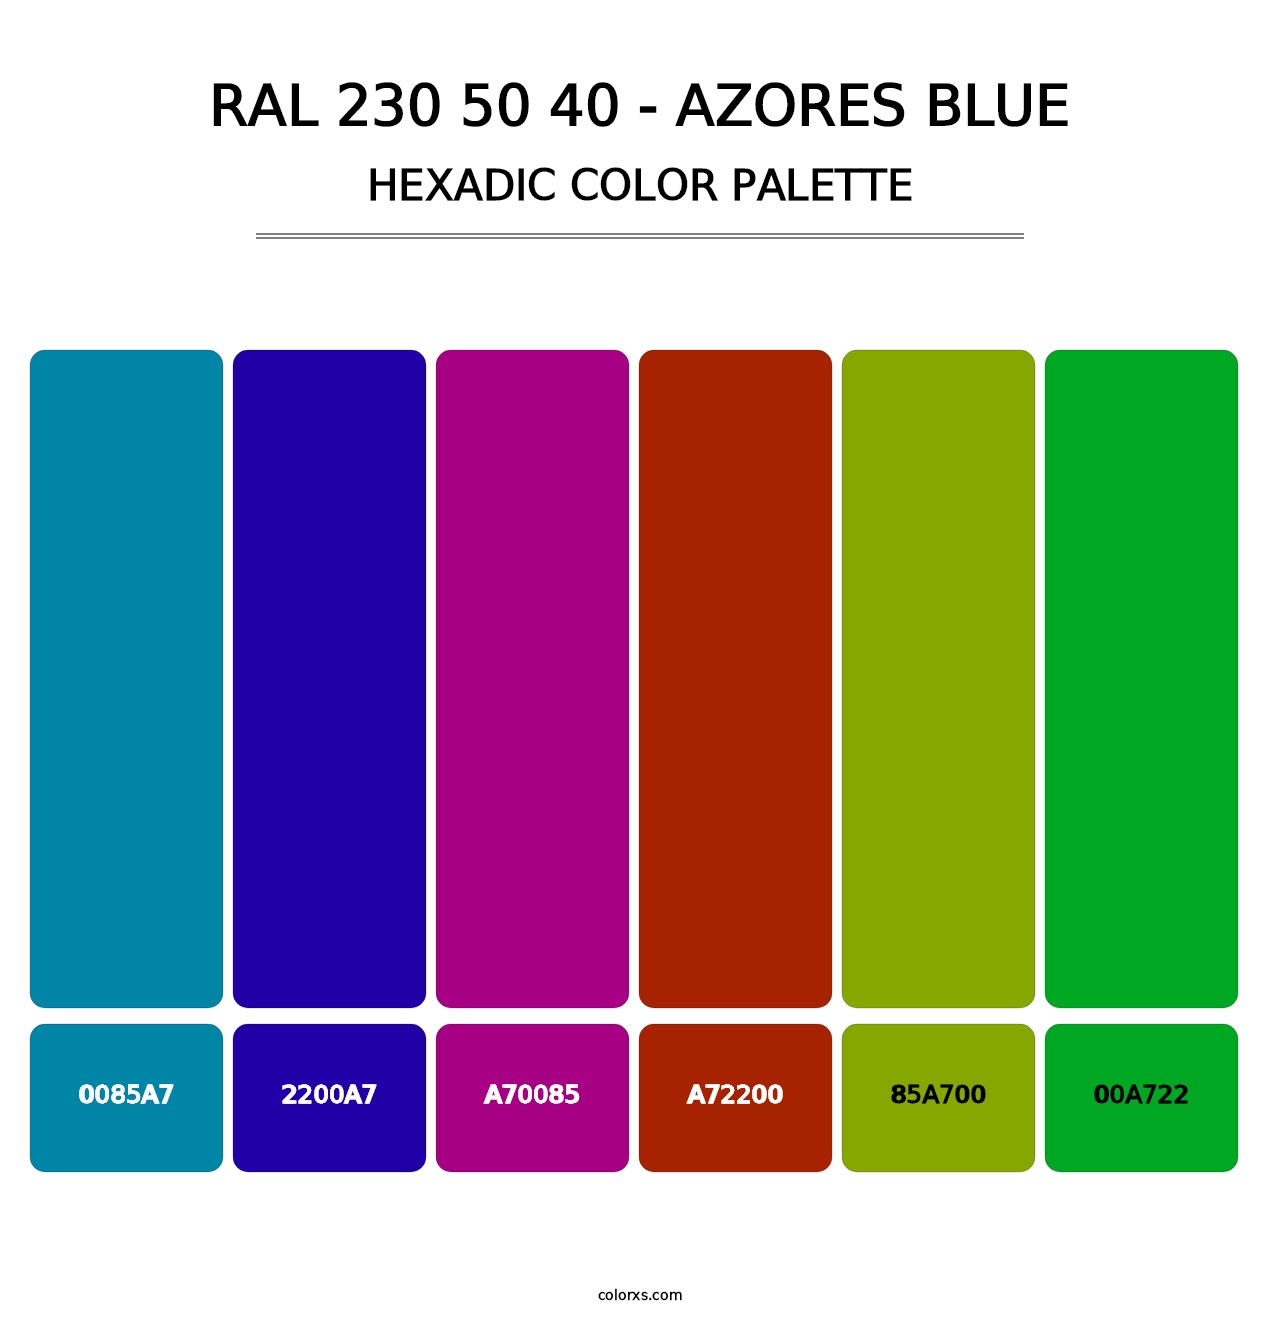 RAL 230 50 40 - Azores Blue - Hexadic Color Palette